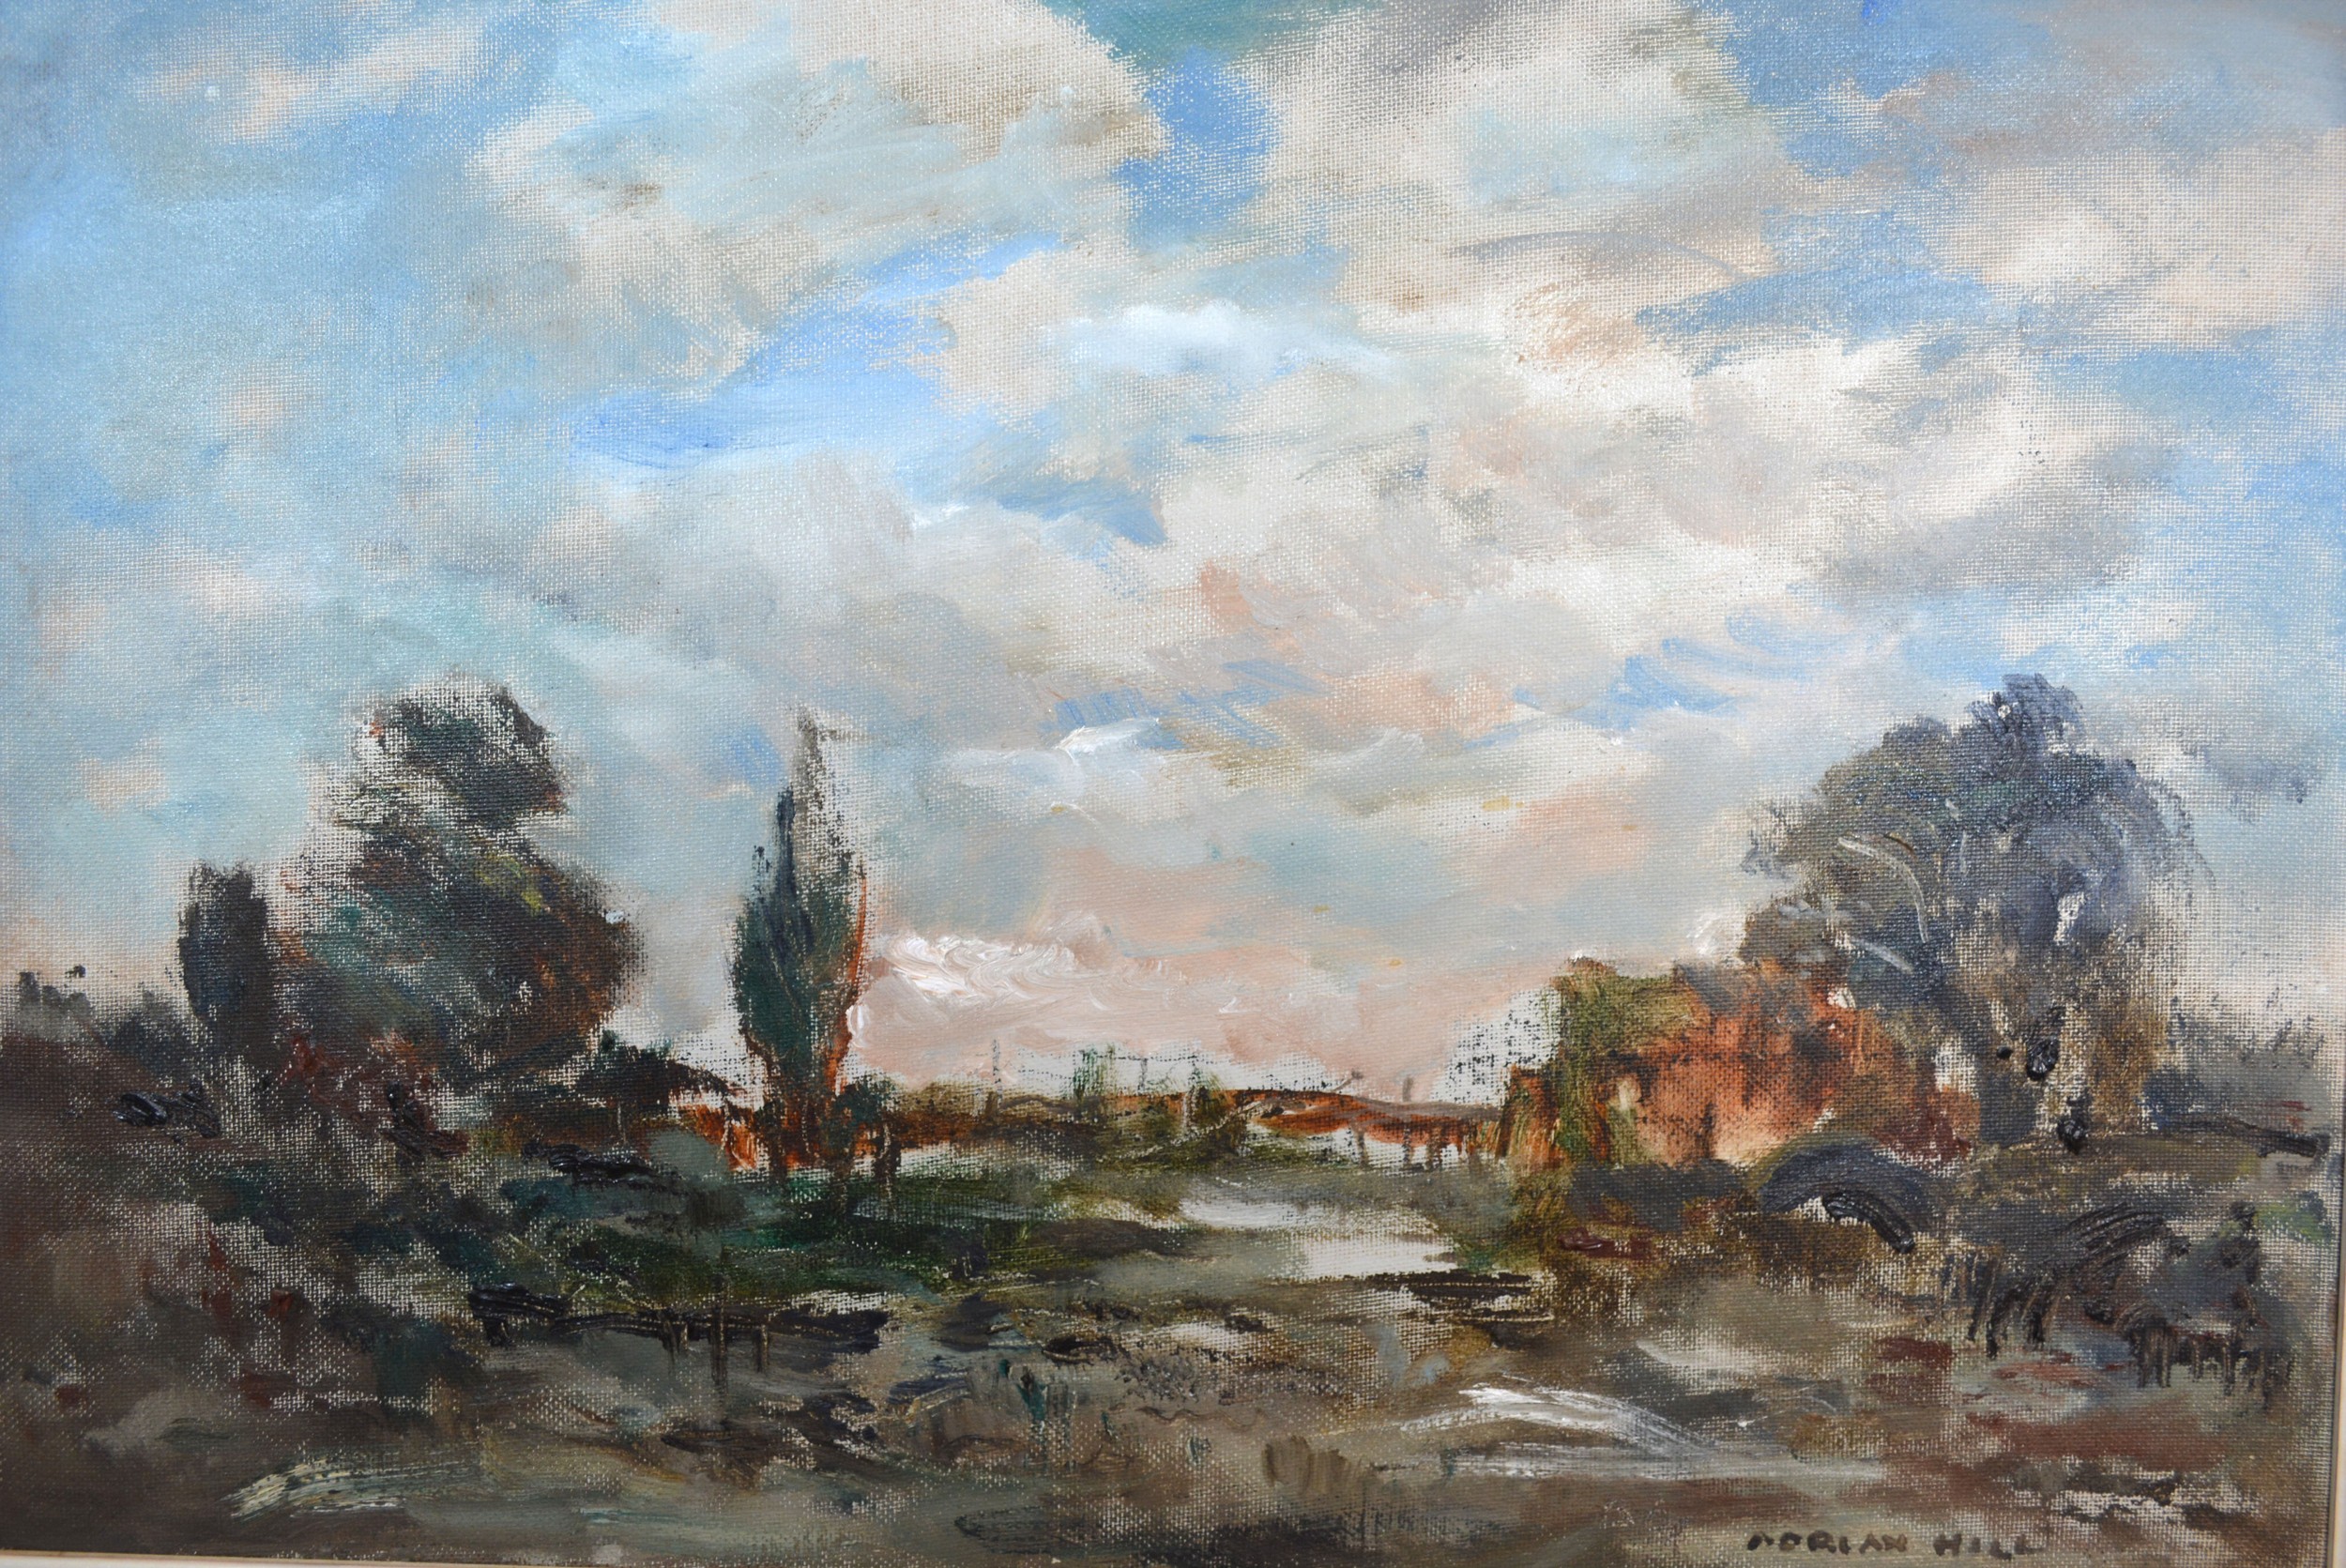 Adrian Hill, The Wooden Bridge, oil on board, signed, 55cms x 75cms